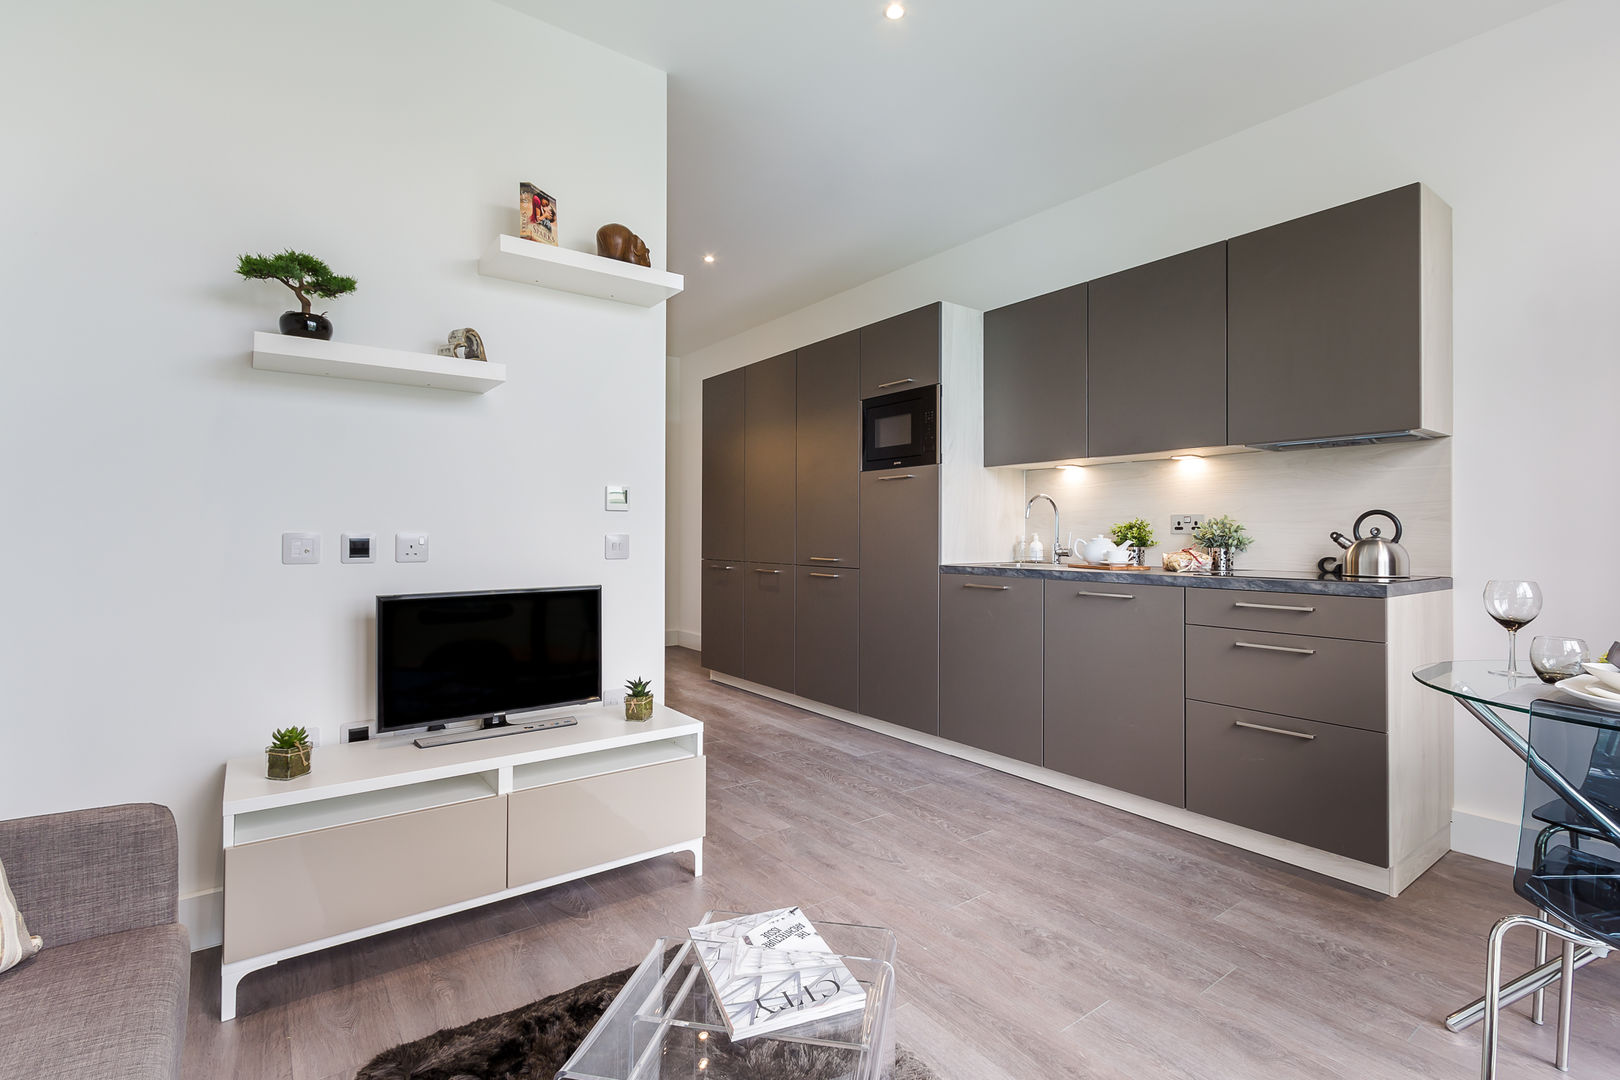 Modern Studio Apartment in London homify Soggiorno moderno studio,apartment,modern,kitchen,living room